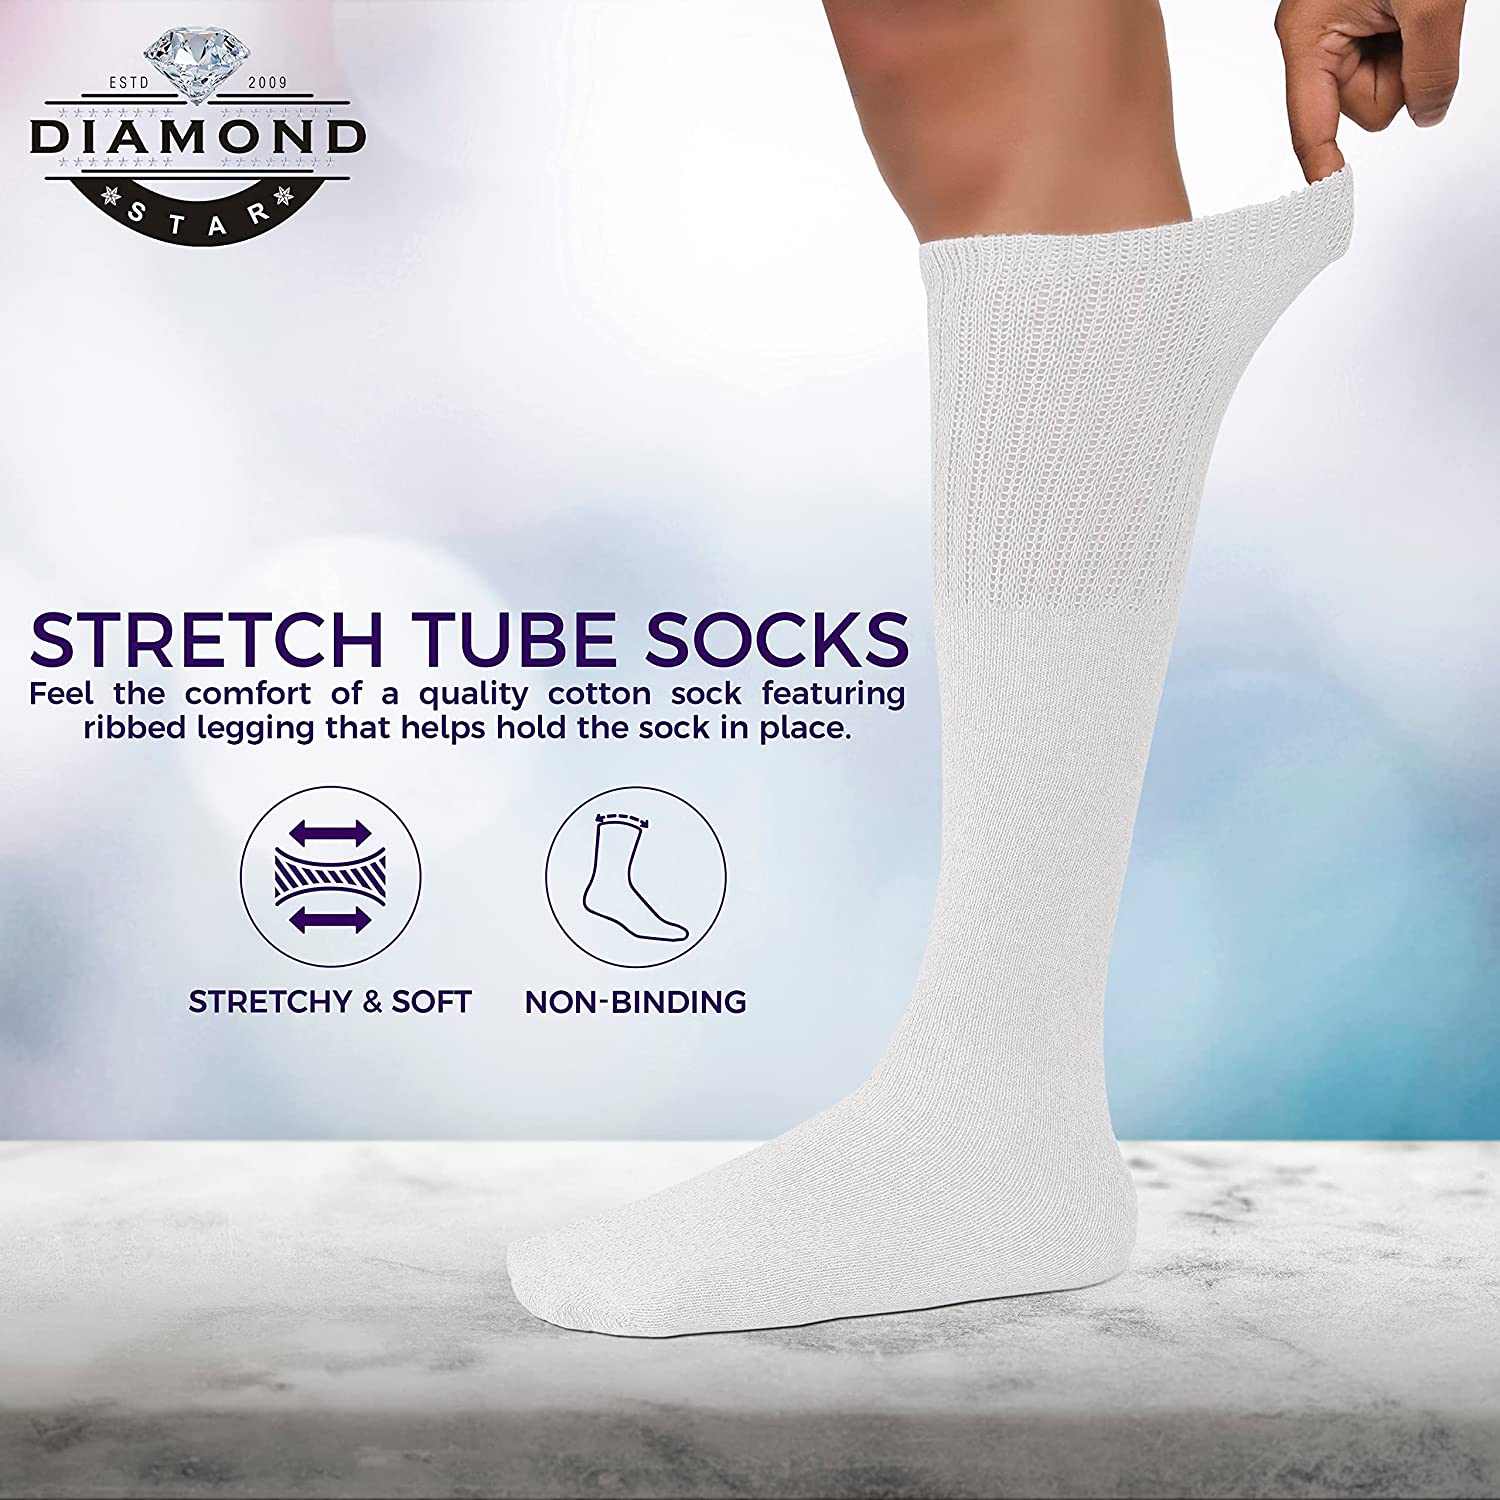 Men's 6 pairs Pack Athletic Tube Socks Running Sports OVER THE CALF Full Cushioned Premium Soft Cotton Big and Tall